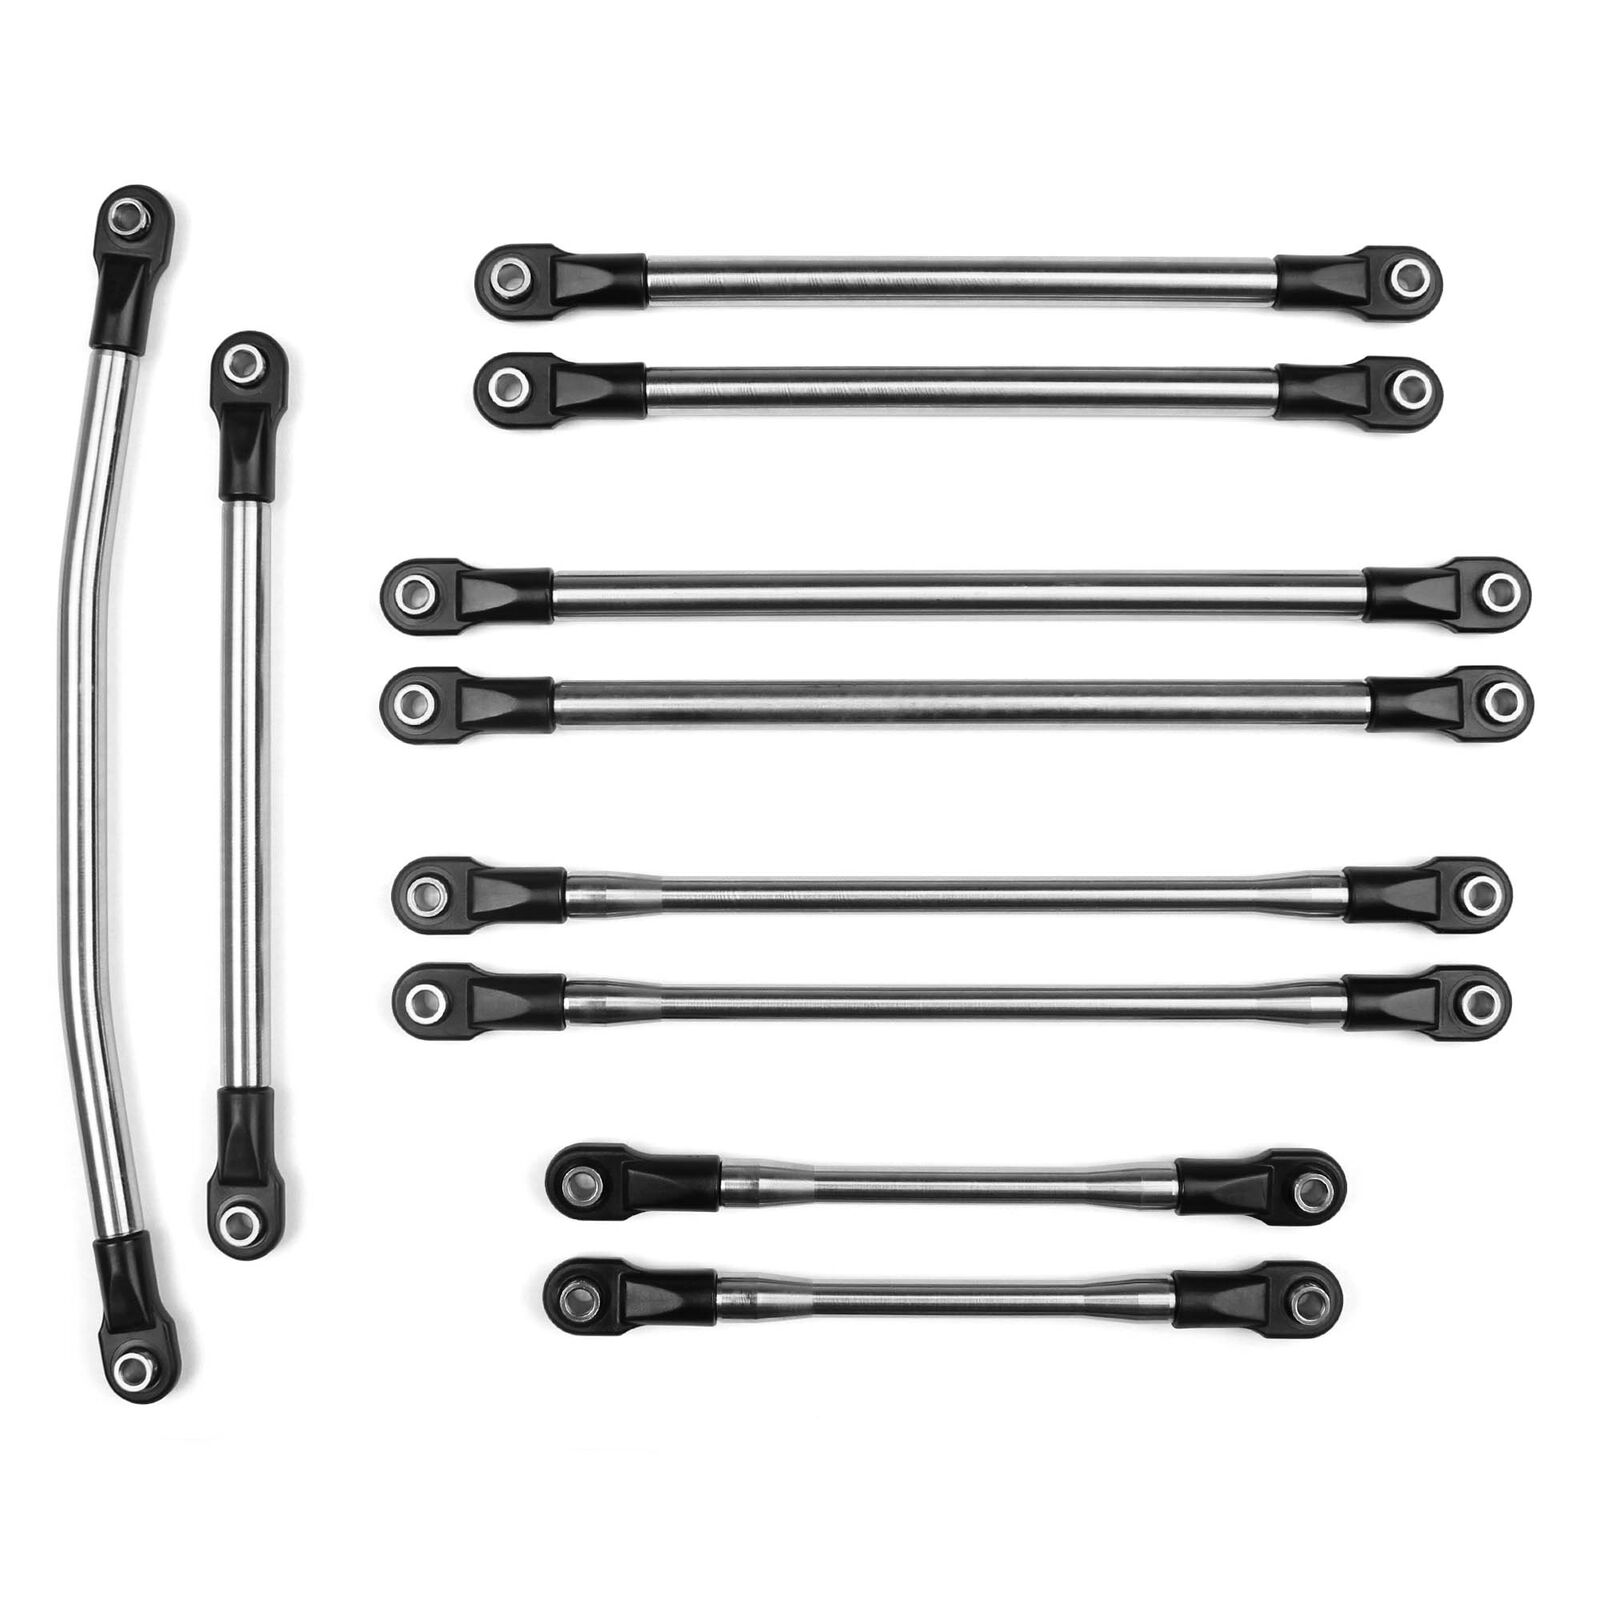 Incision 1/4 Stainless Steel Link Kit (10): SCX10-II